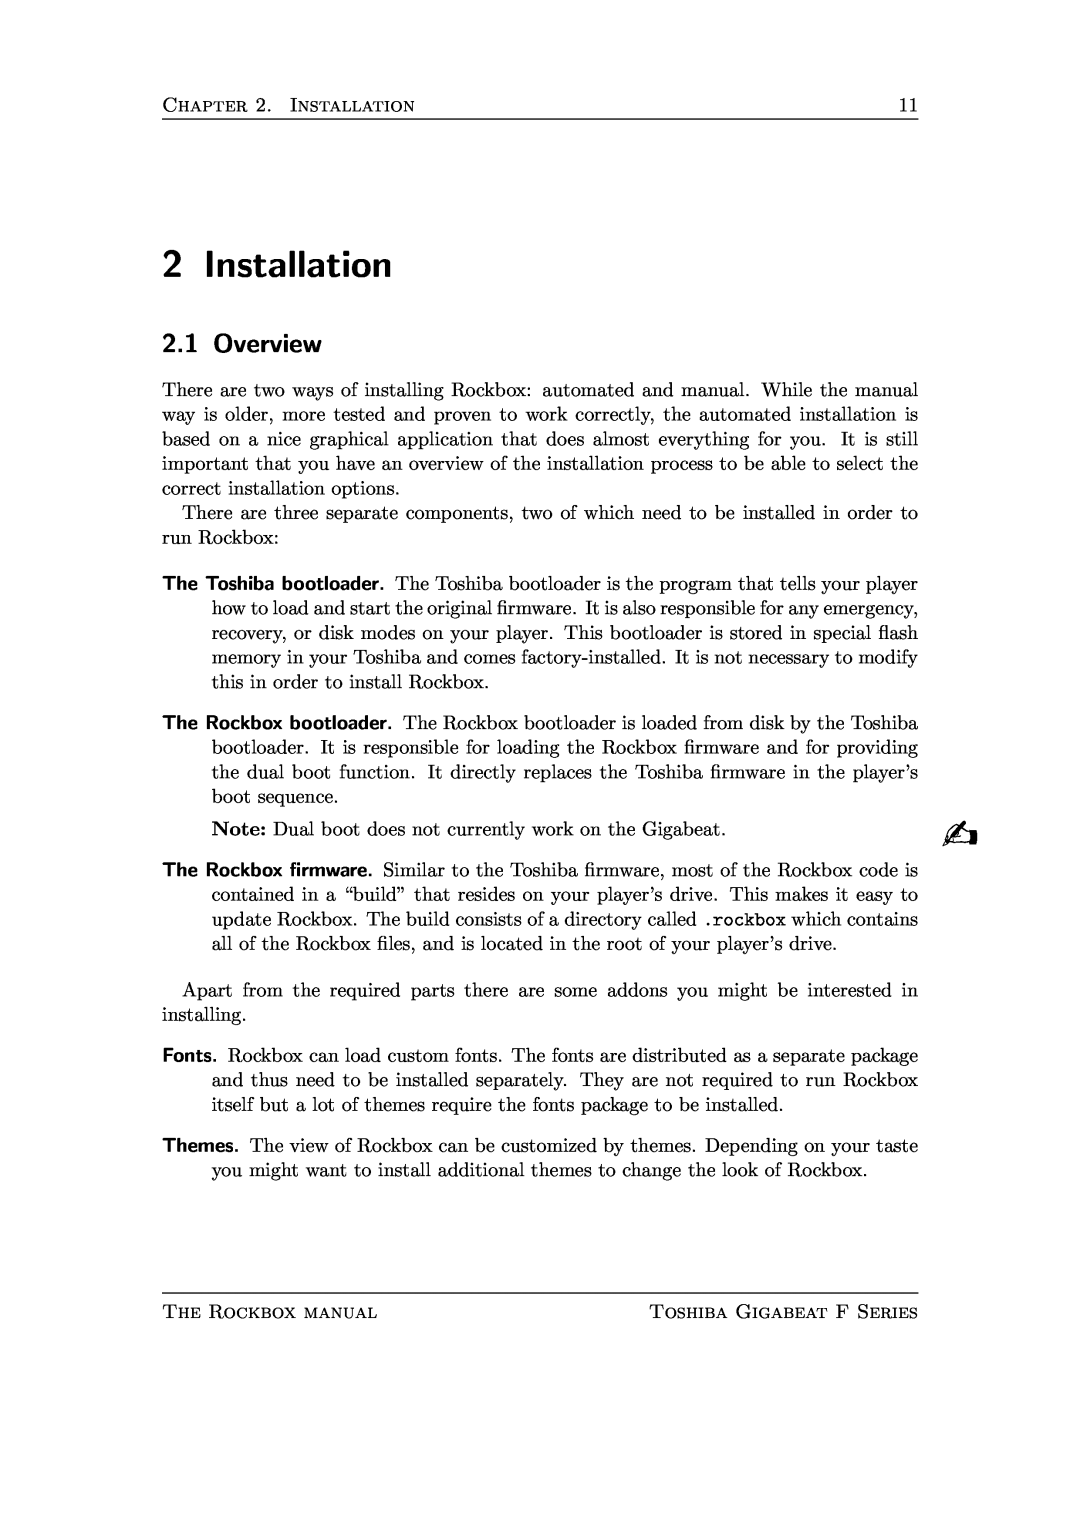 Toshiba F Series manual Installation, Overview 